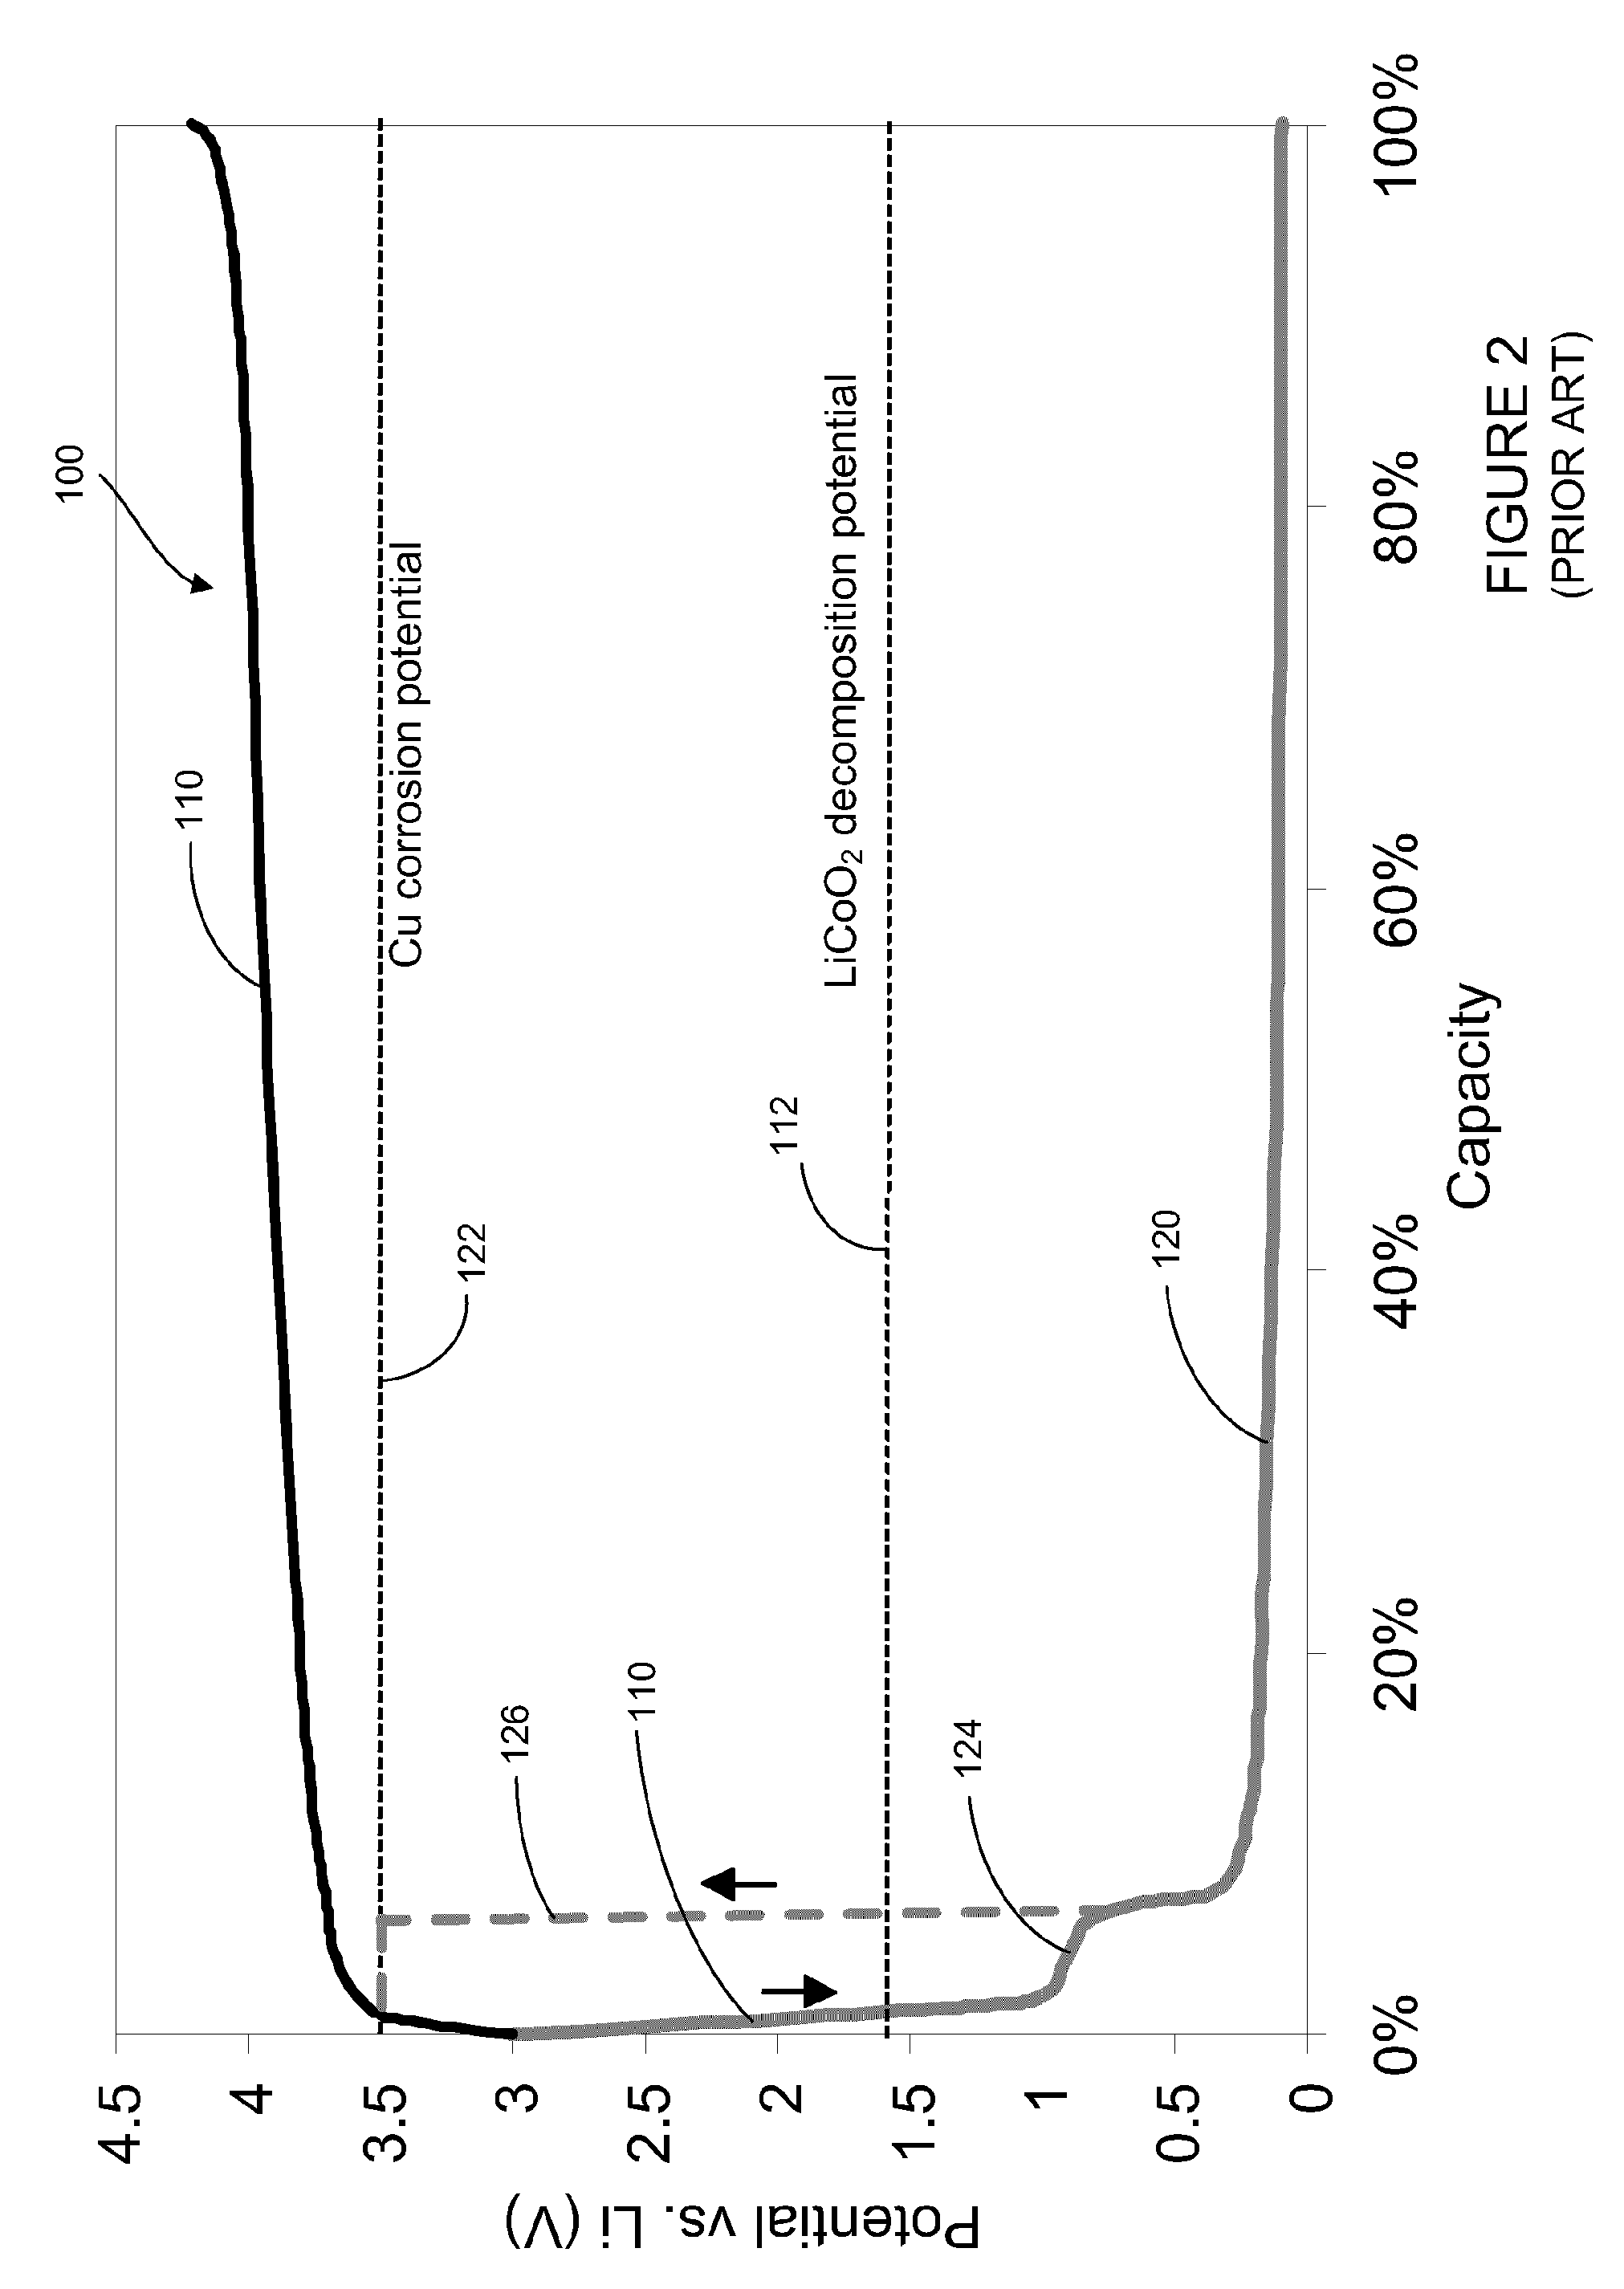 Medical device having lithium-ion battery